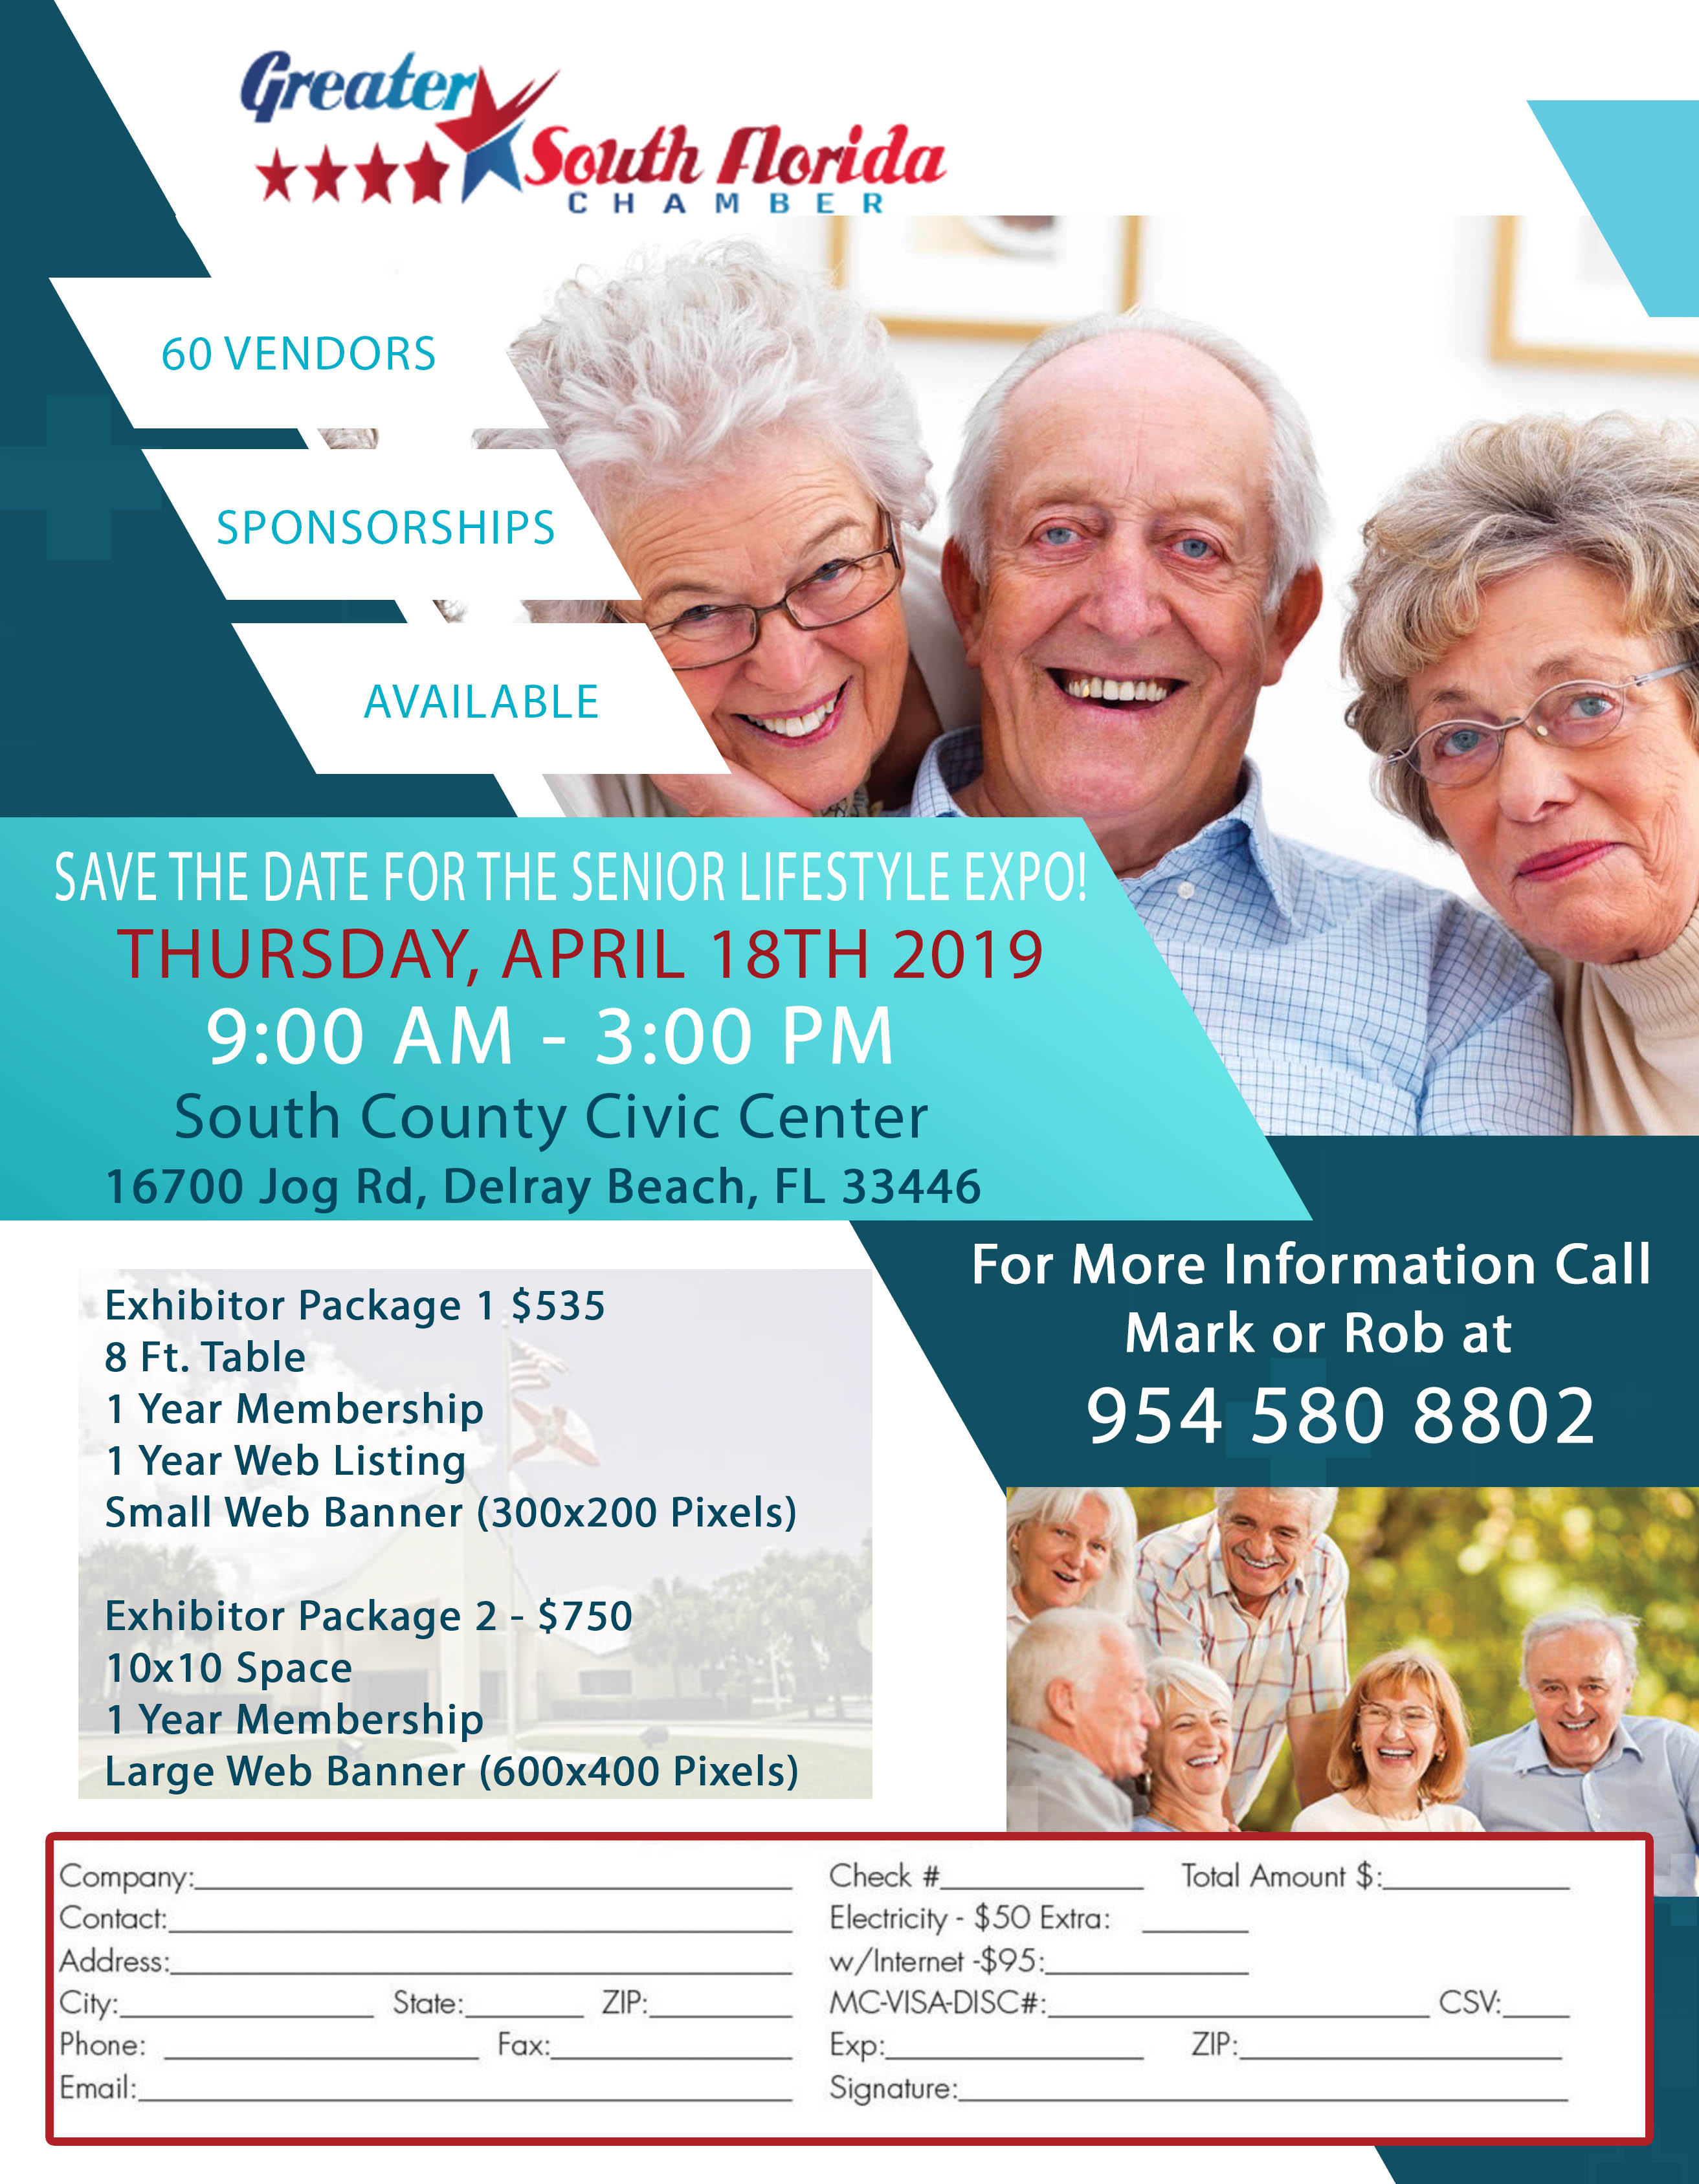 Senior Lifestyle Expo - Greater South Florida Chamber